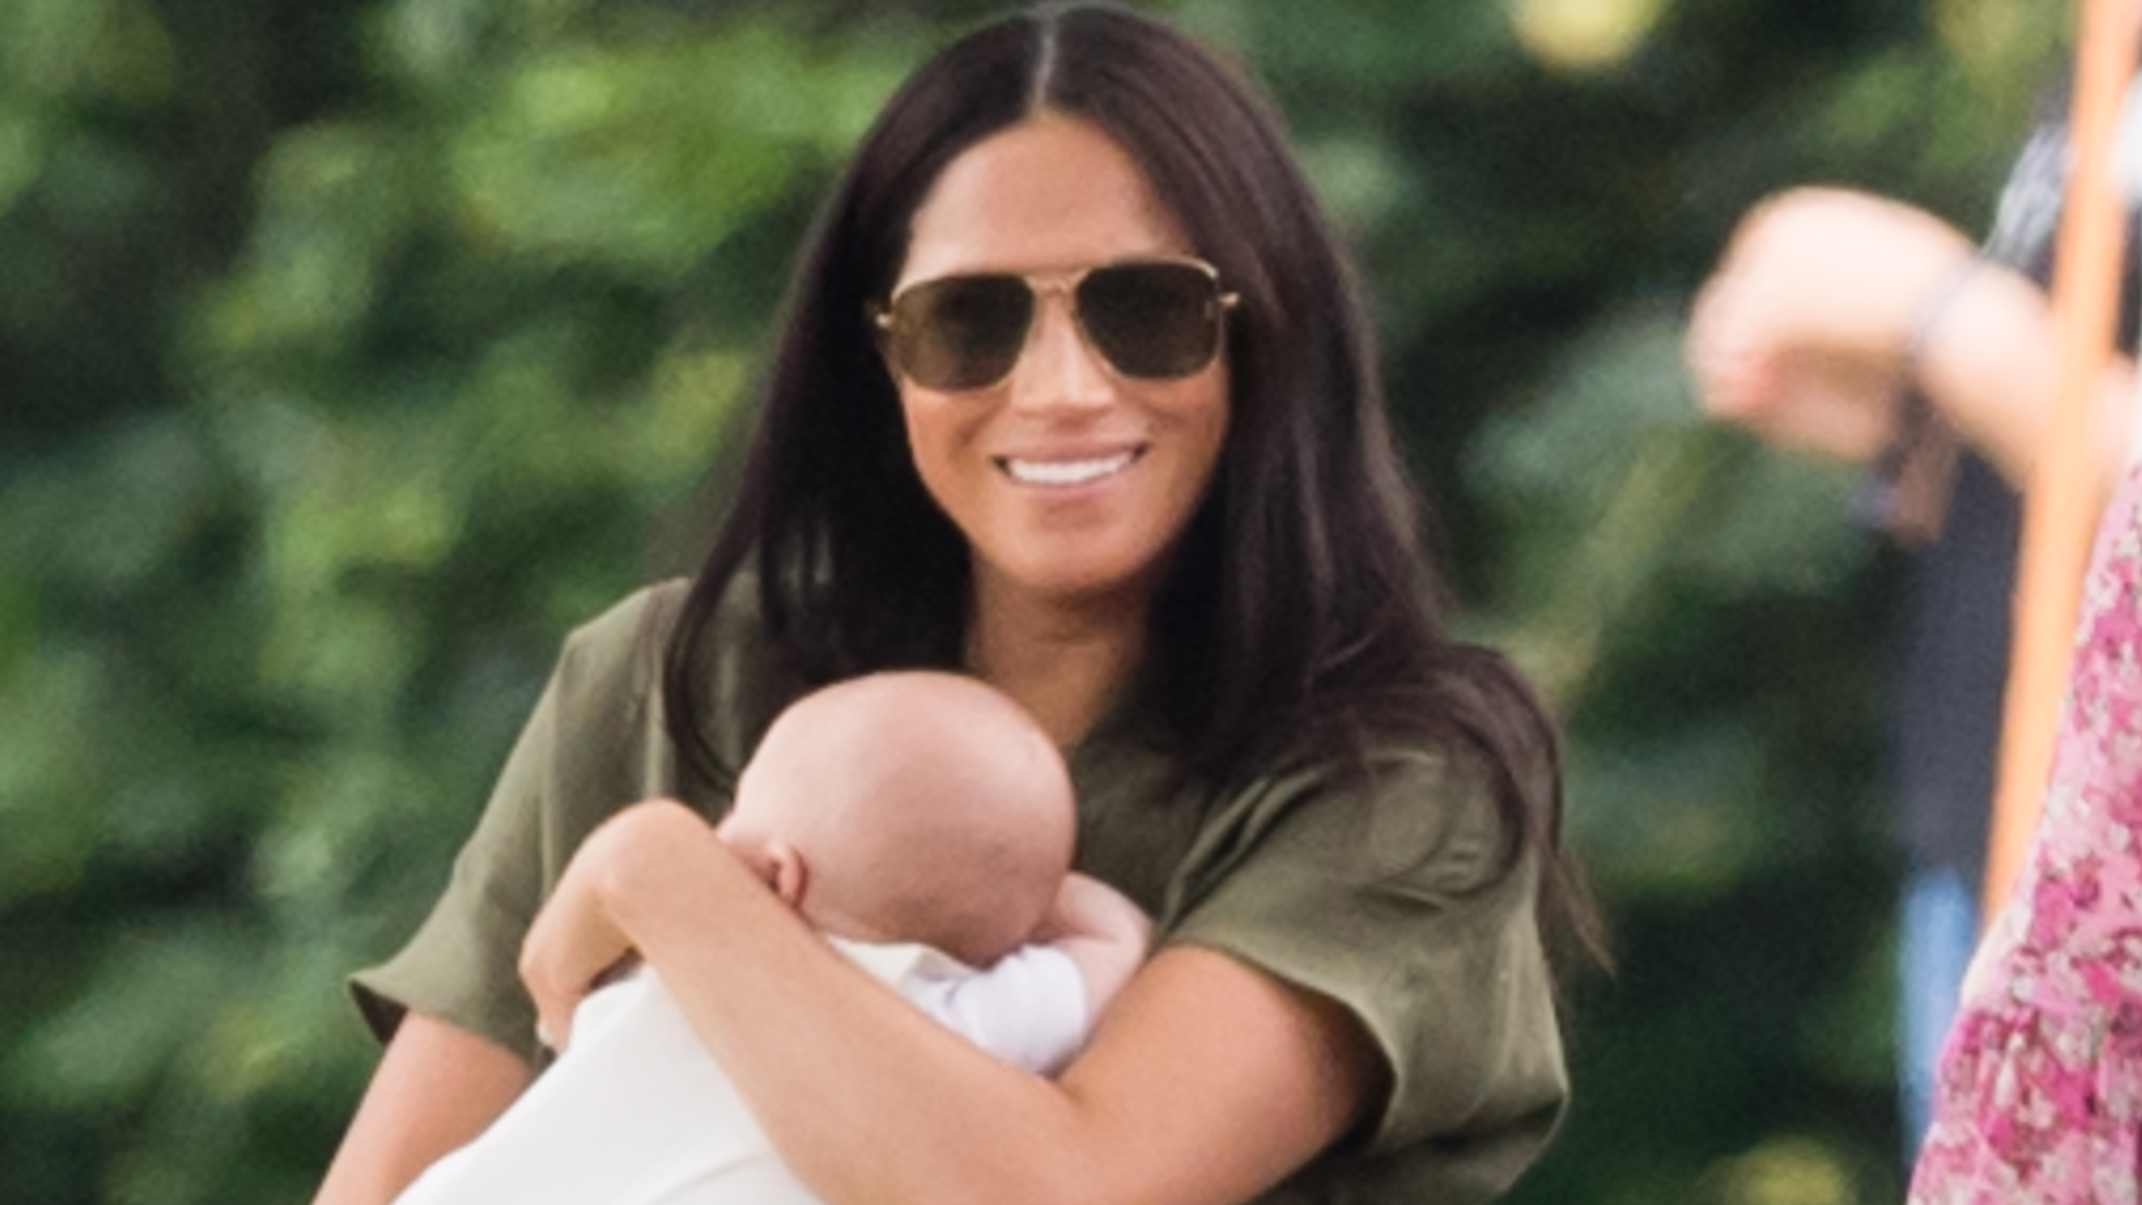 Archie’s first official outing! The royal babies steal the spotlight from their dads